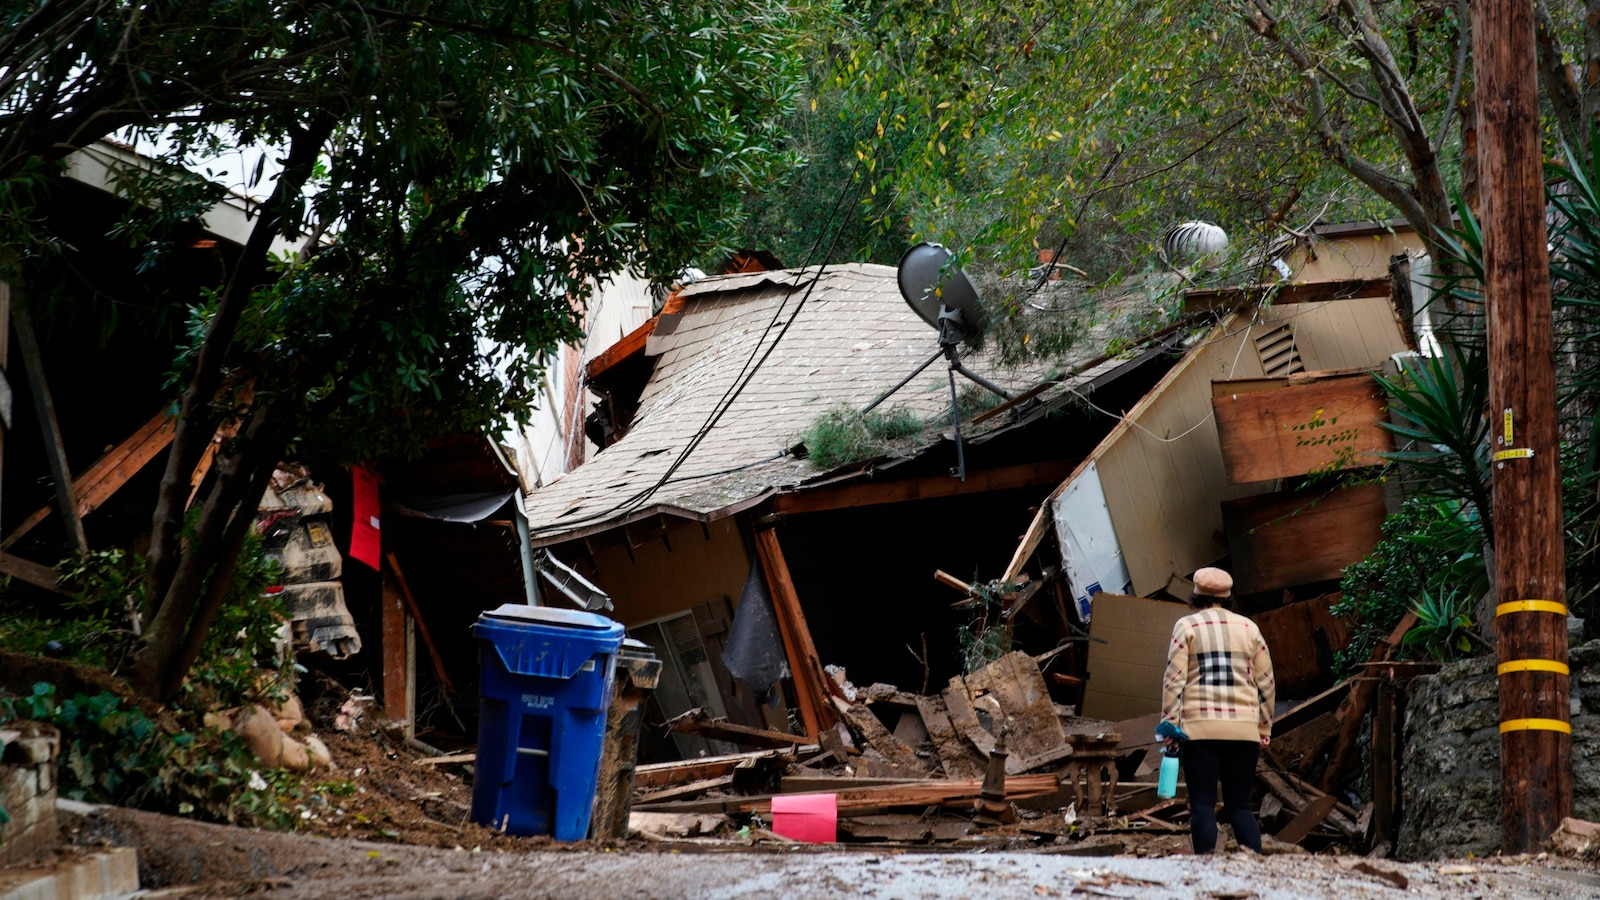 Southern California hit by possible tornado and increased rainfall from storm